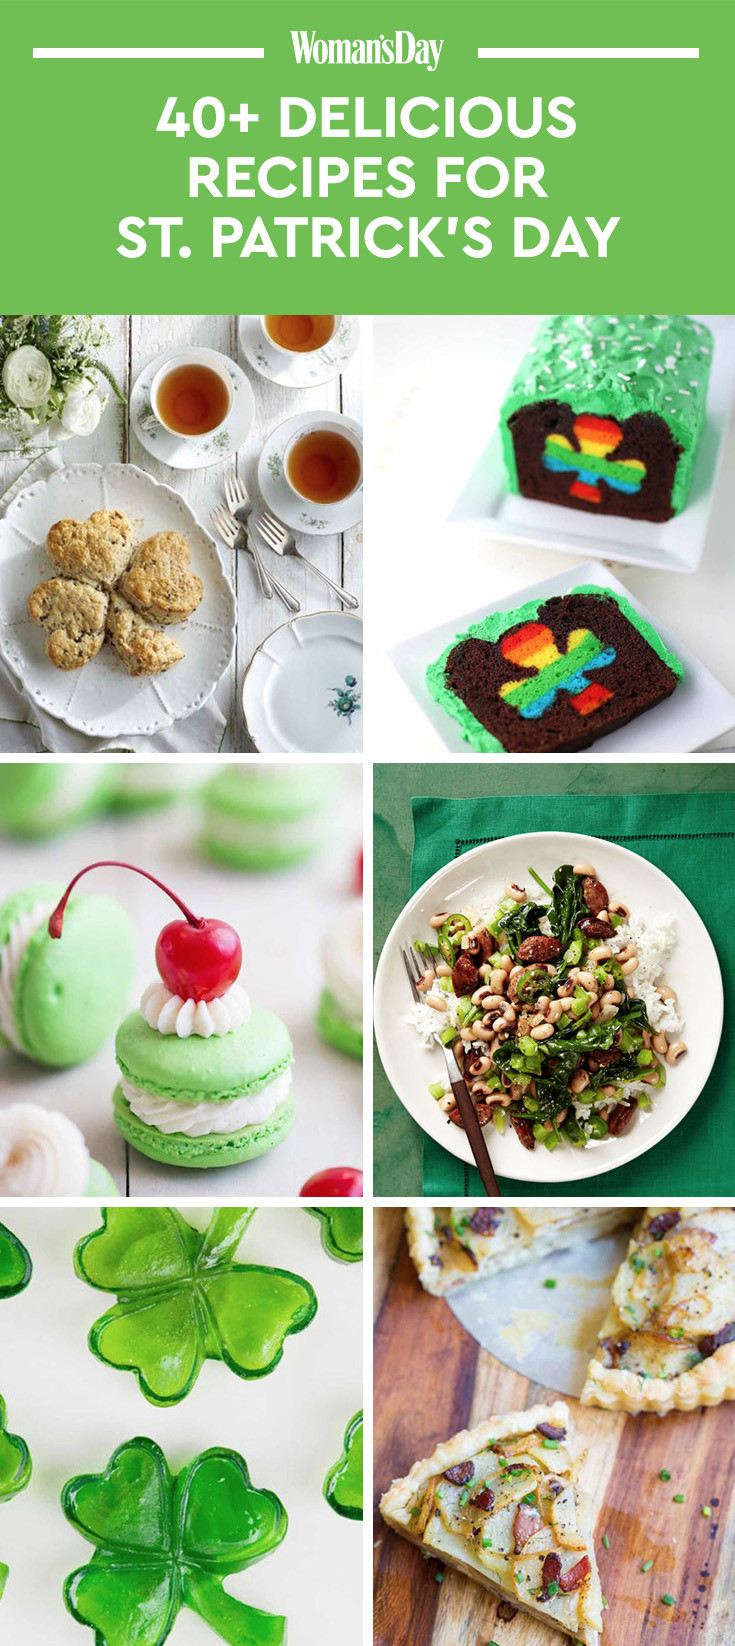 St Patrick's Day Food Ideas For Parties
 45 St Patricks Day Recipes – Irish Food Ideas for St